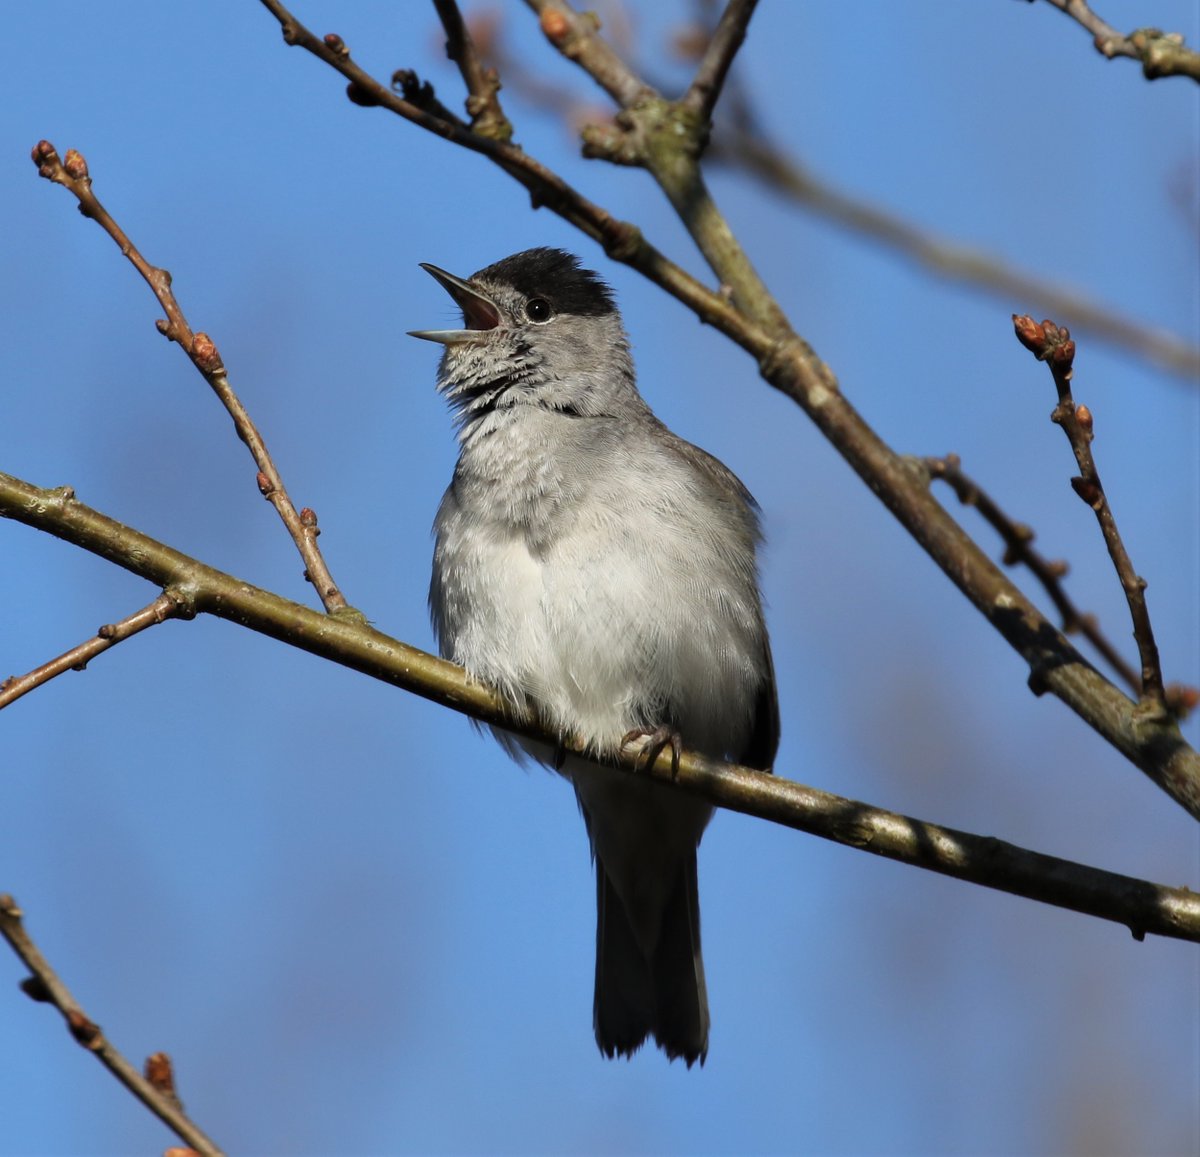 A beautiful sunny Thursday, brilliant birdsong and a search for an American avian visitor - take a look at our latest sightings blog from volunteer Graham Jacobs. bit.ly/18Aprilsightin… 📷Blackcap by Gareth Hughes